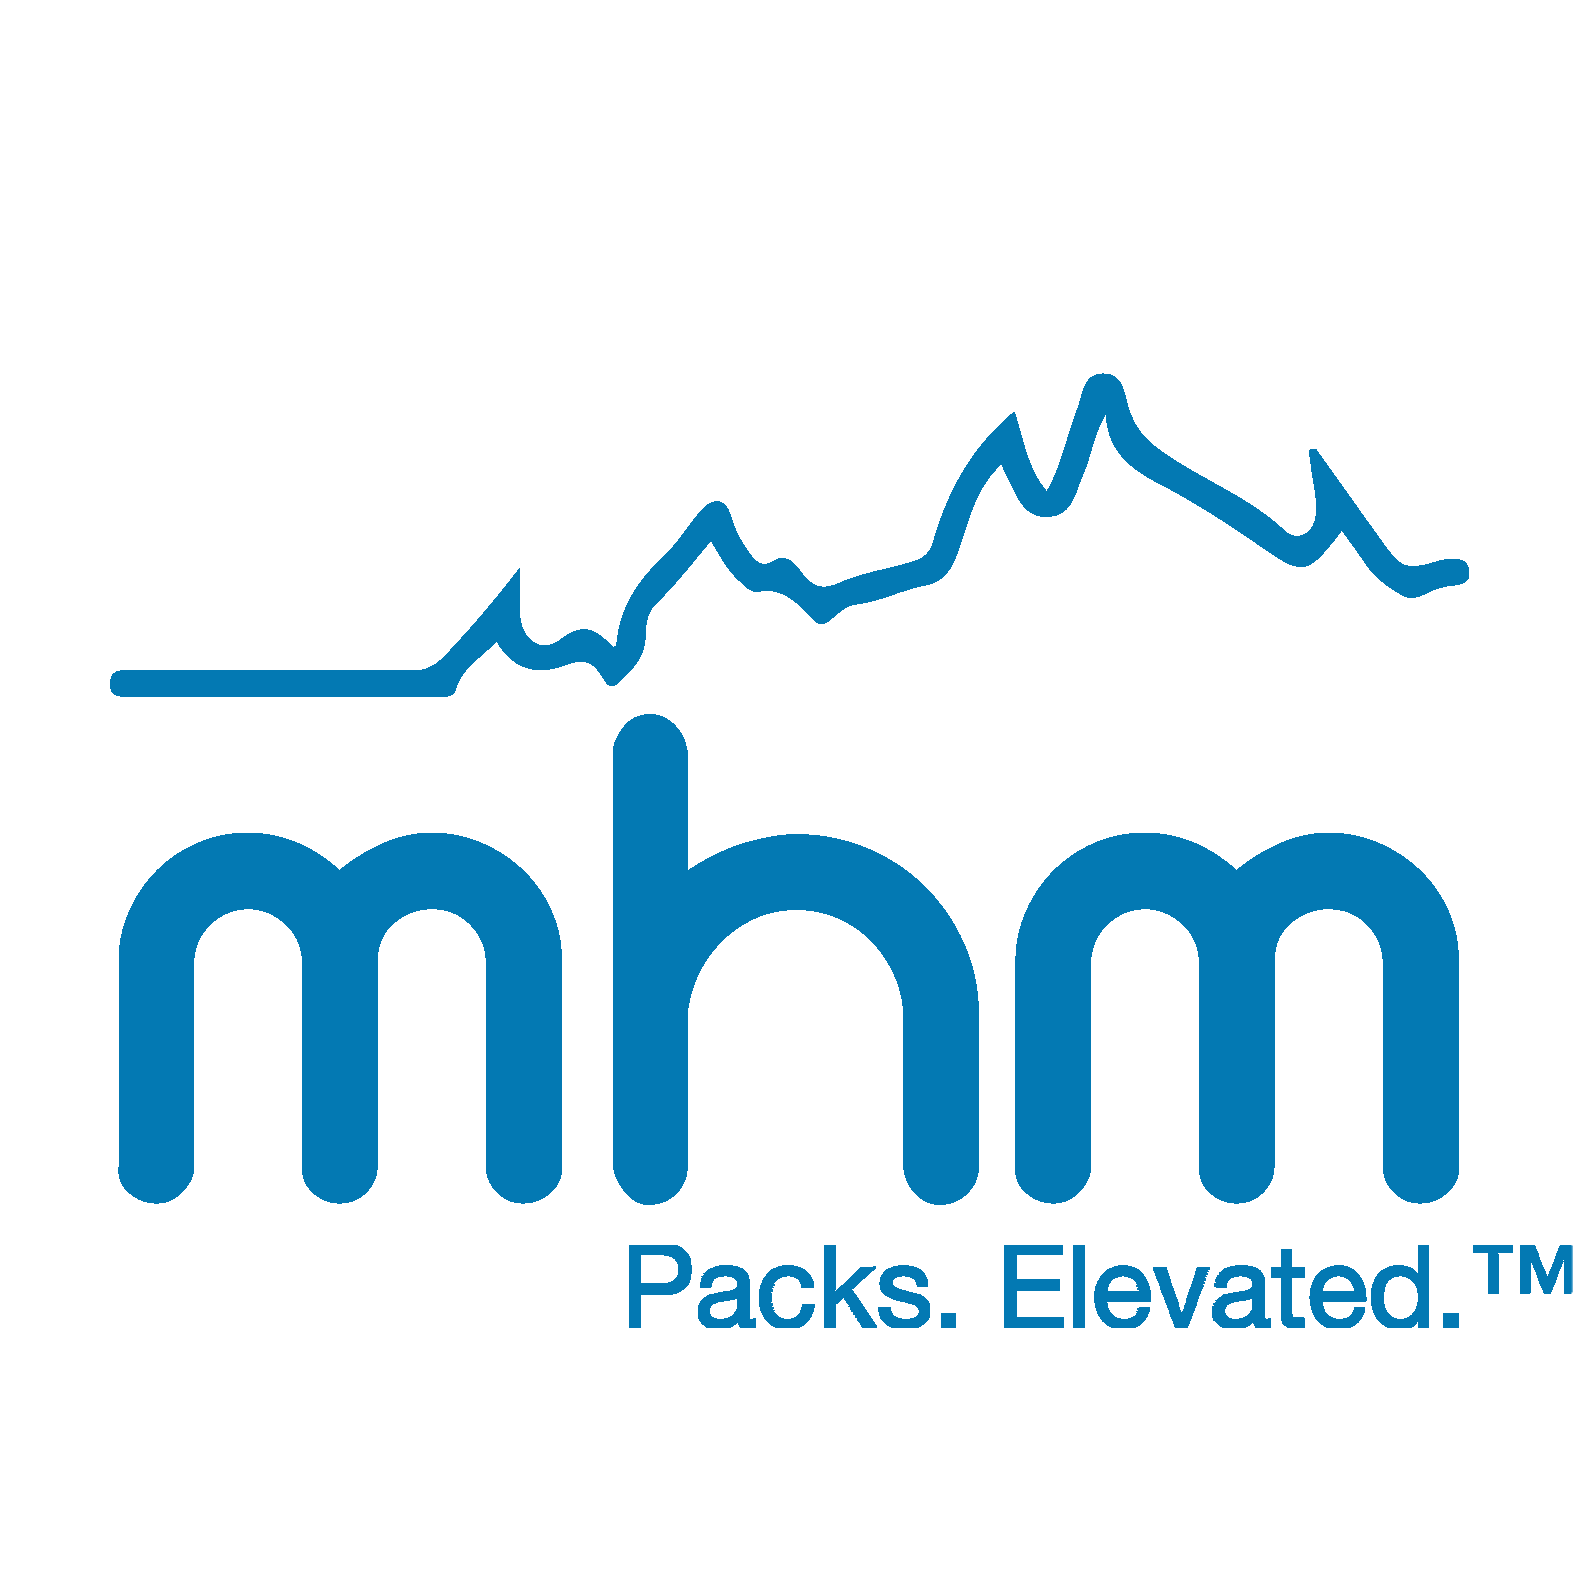 The new generation of backpacks. MHM is a Colorado company that makes innovative, high quality outdoor gear. Packs. Elevated.™ #PacksElevated